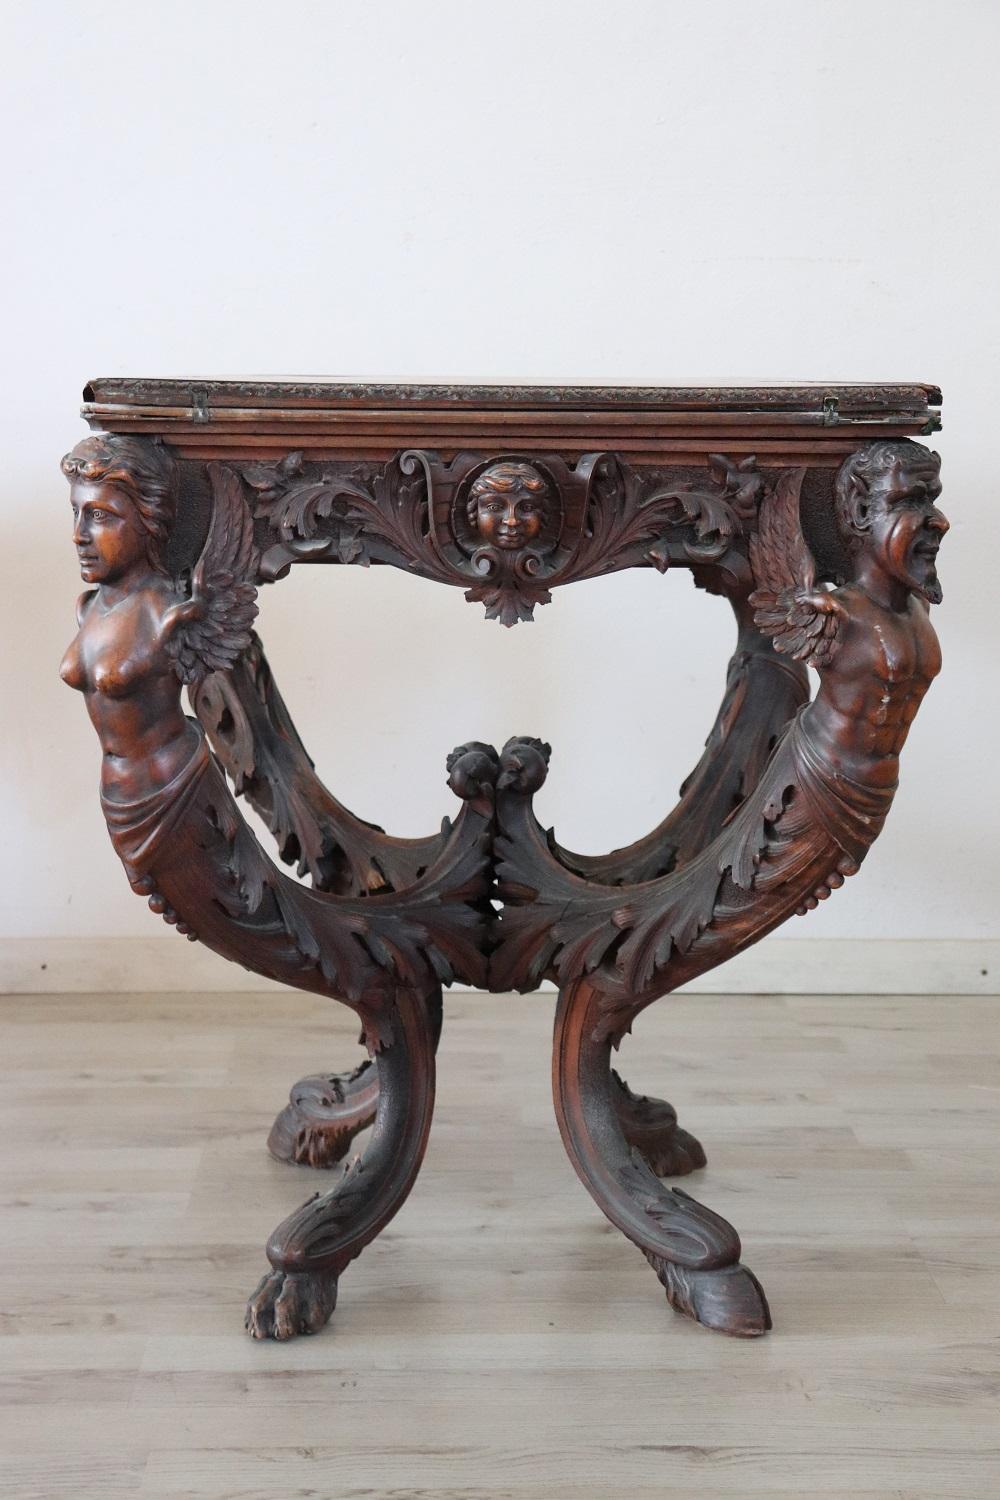 Rare beautiful antique game table in precious hand carved walnut wood. When the table is closed, the table becomes smaller and can be used as an elegant center table. This majestic table features high artistic quality carving work. The rich